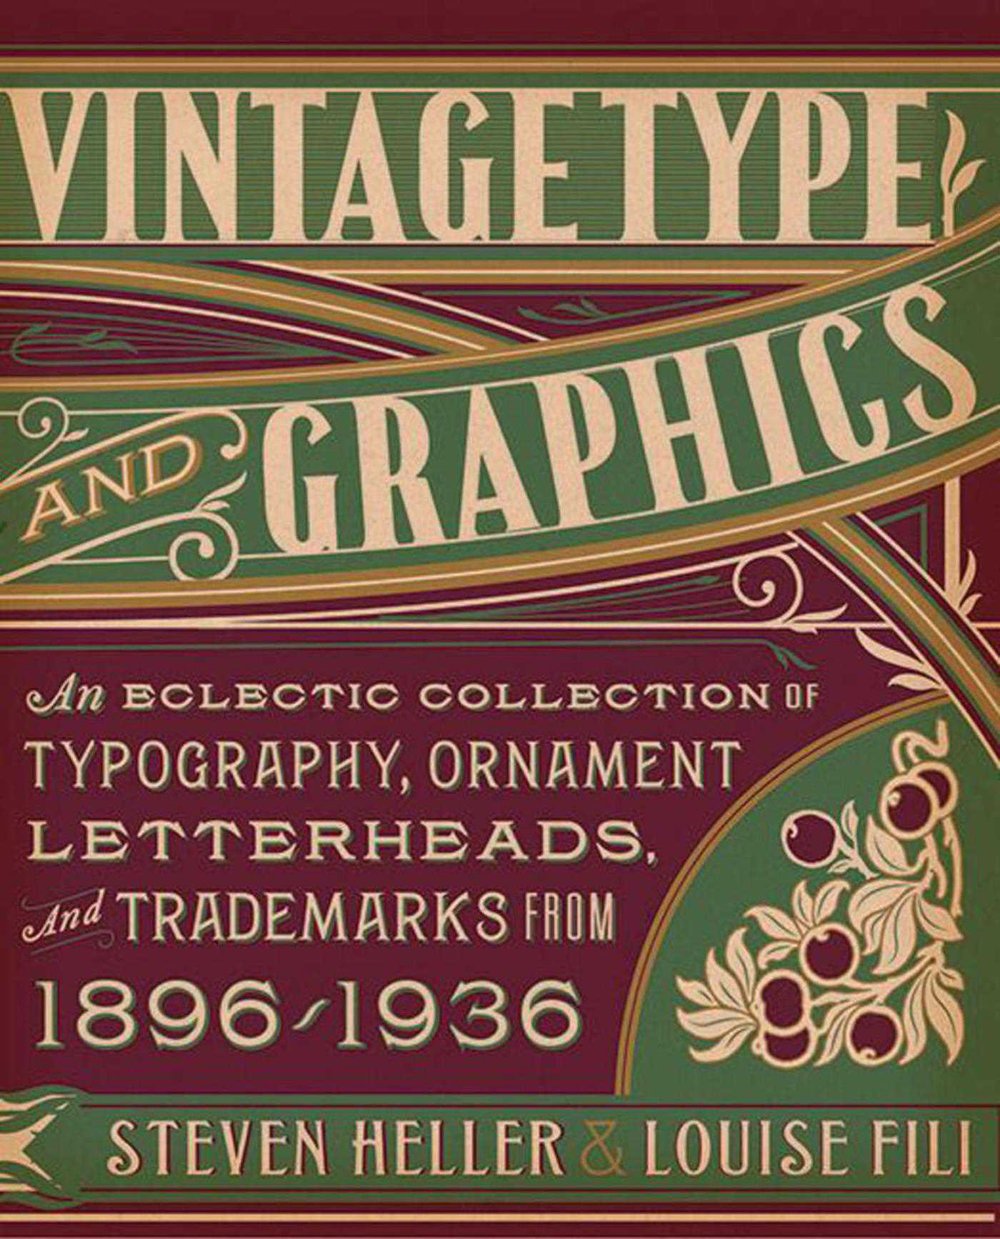 vintage-type-and-graphics-9781581158922_hr.jpg